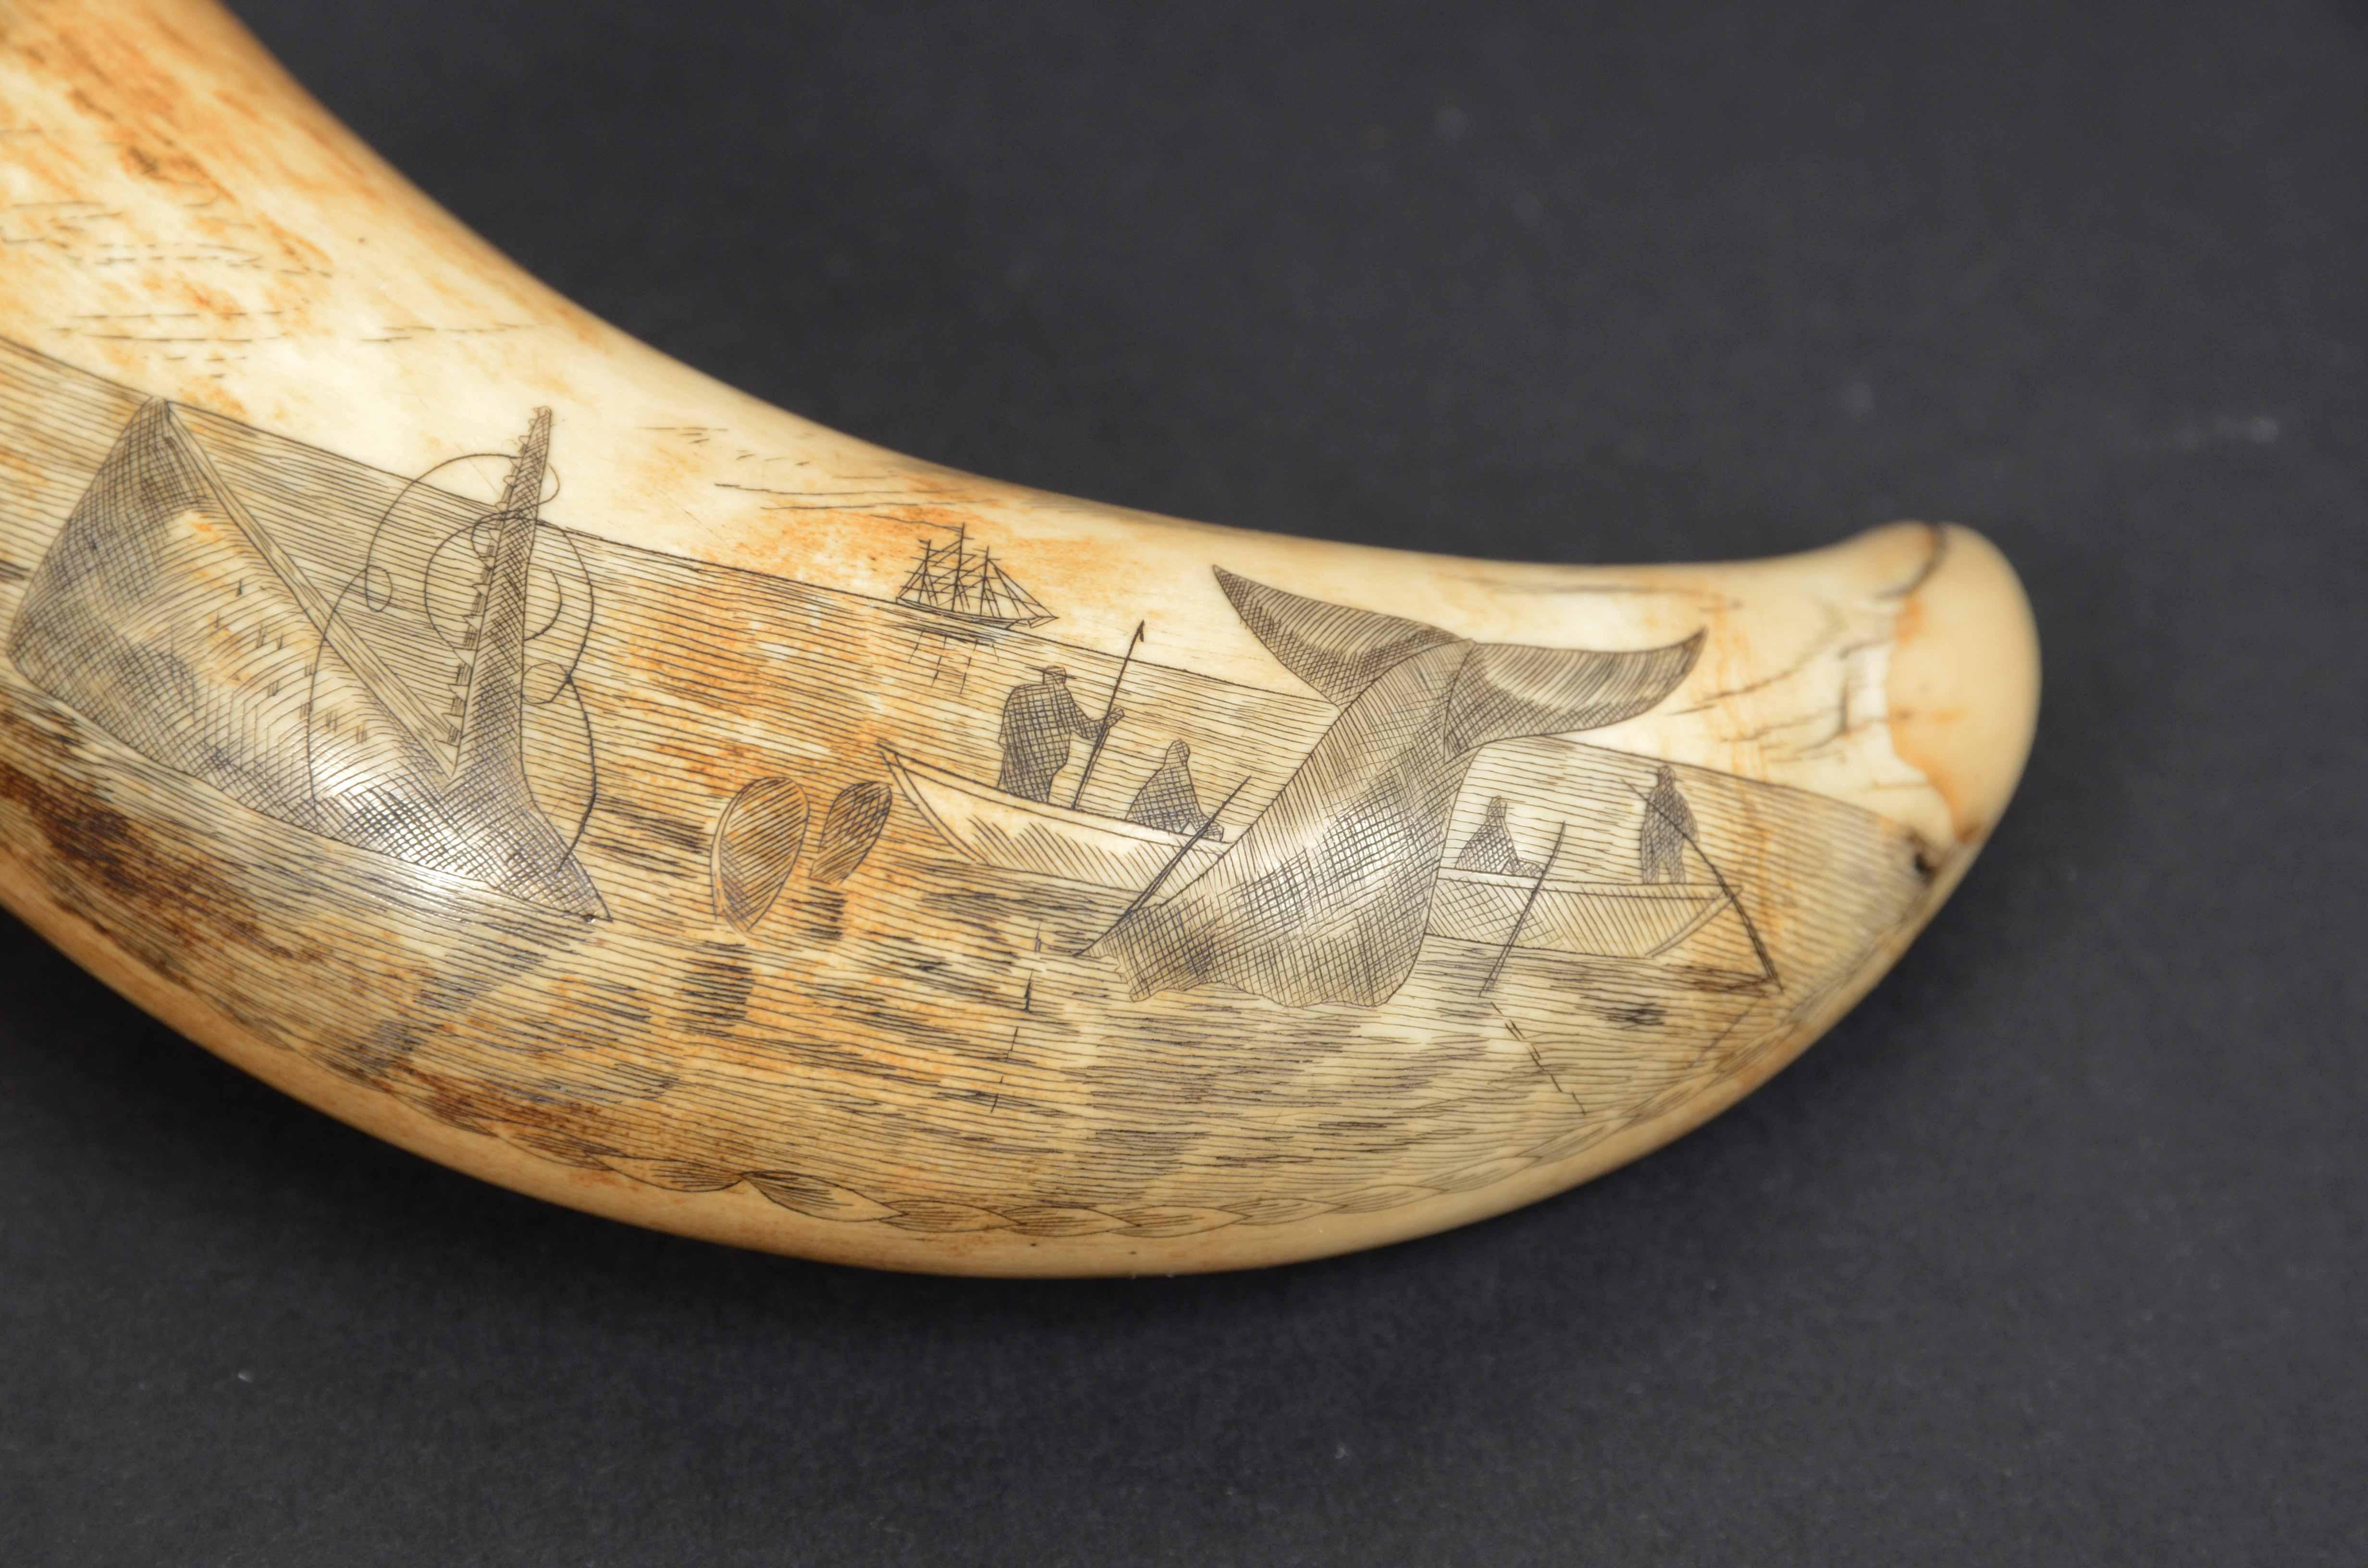 Mid-19th Century Scrimshaw of engraved whale tooth dated 1867 with whaling scene